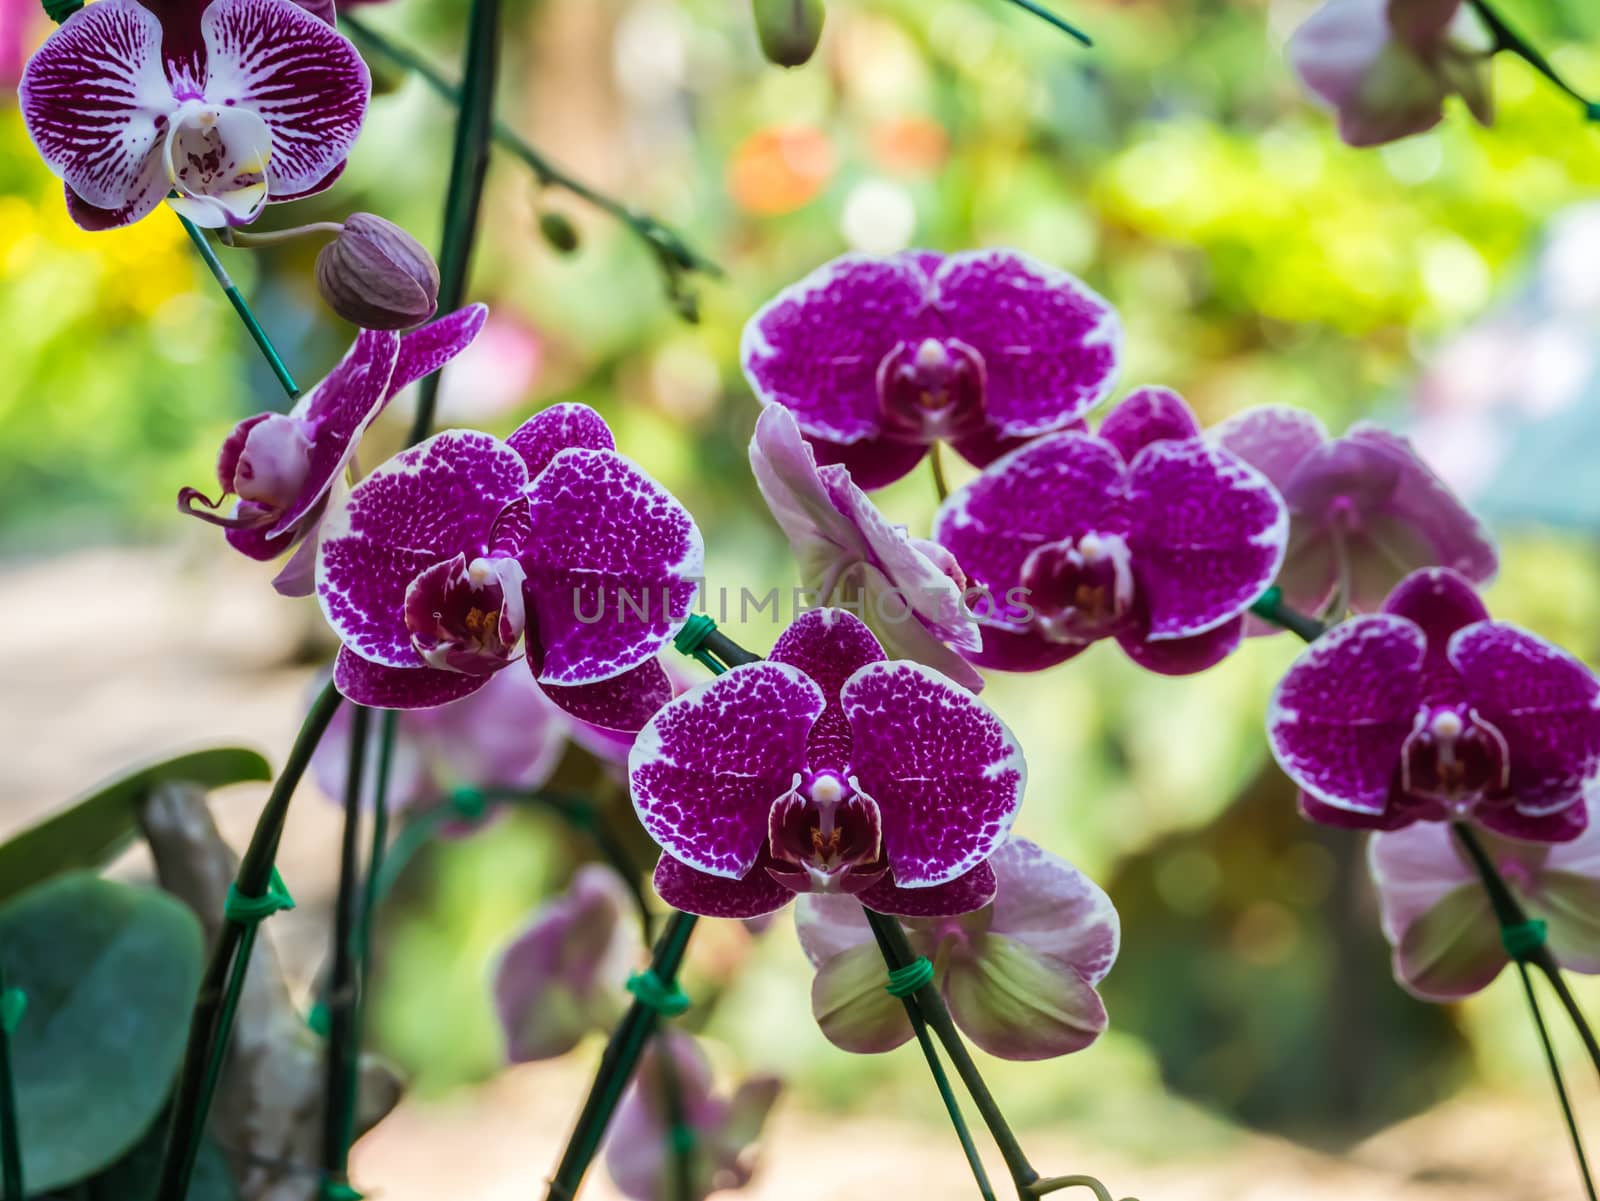 Orchids With blurred background by nikky1972